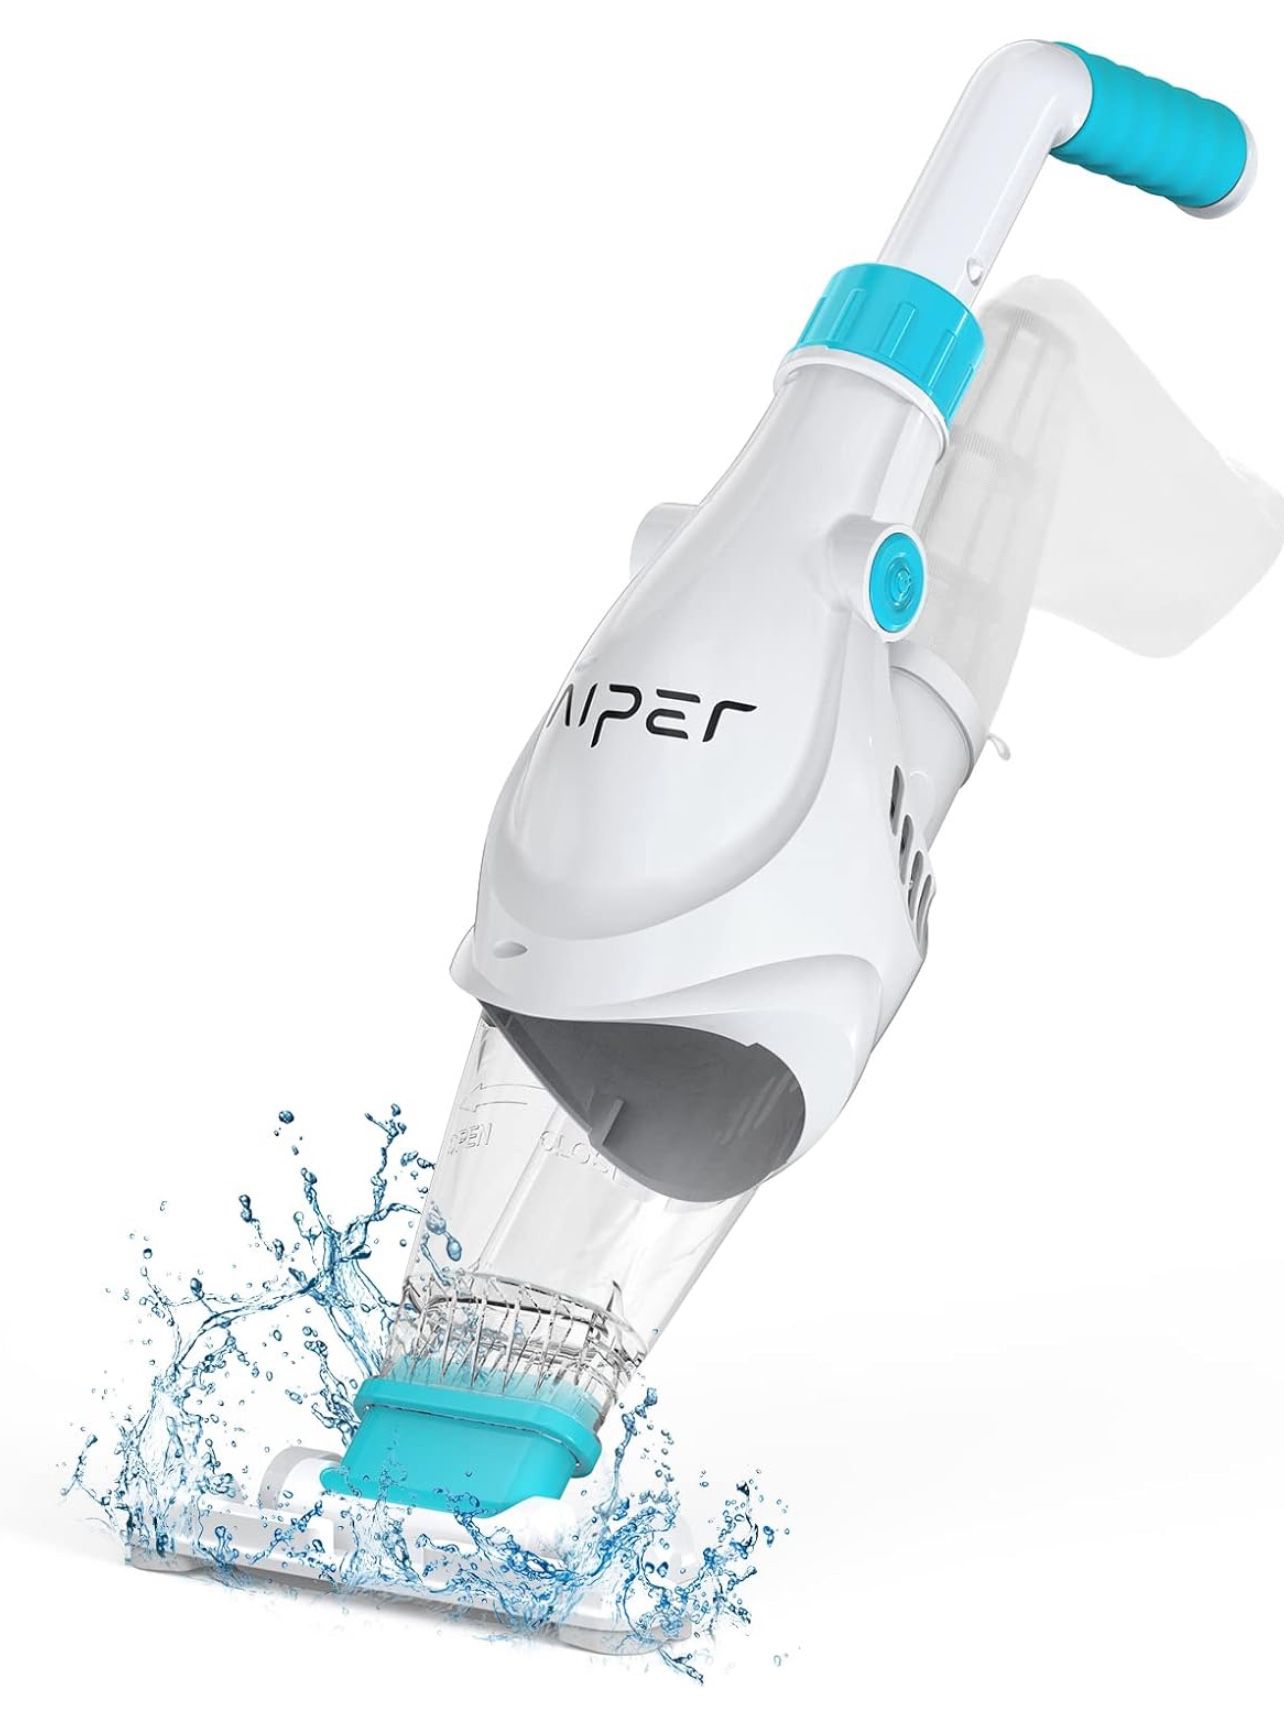 AIPER Handheld Pool Vacuum, Cordless Rechargeable Pool Vacuum Cleaner with Scrub Brush Head, Large Filter Bag, Perfect for Above-Ground/In-Ground Pool